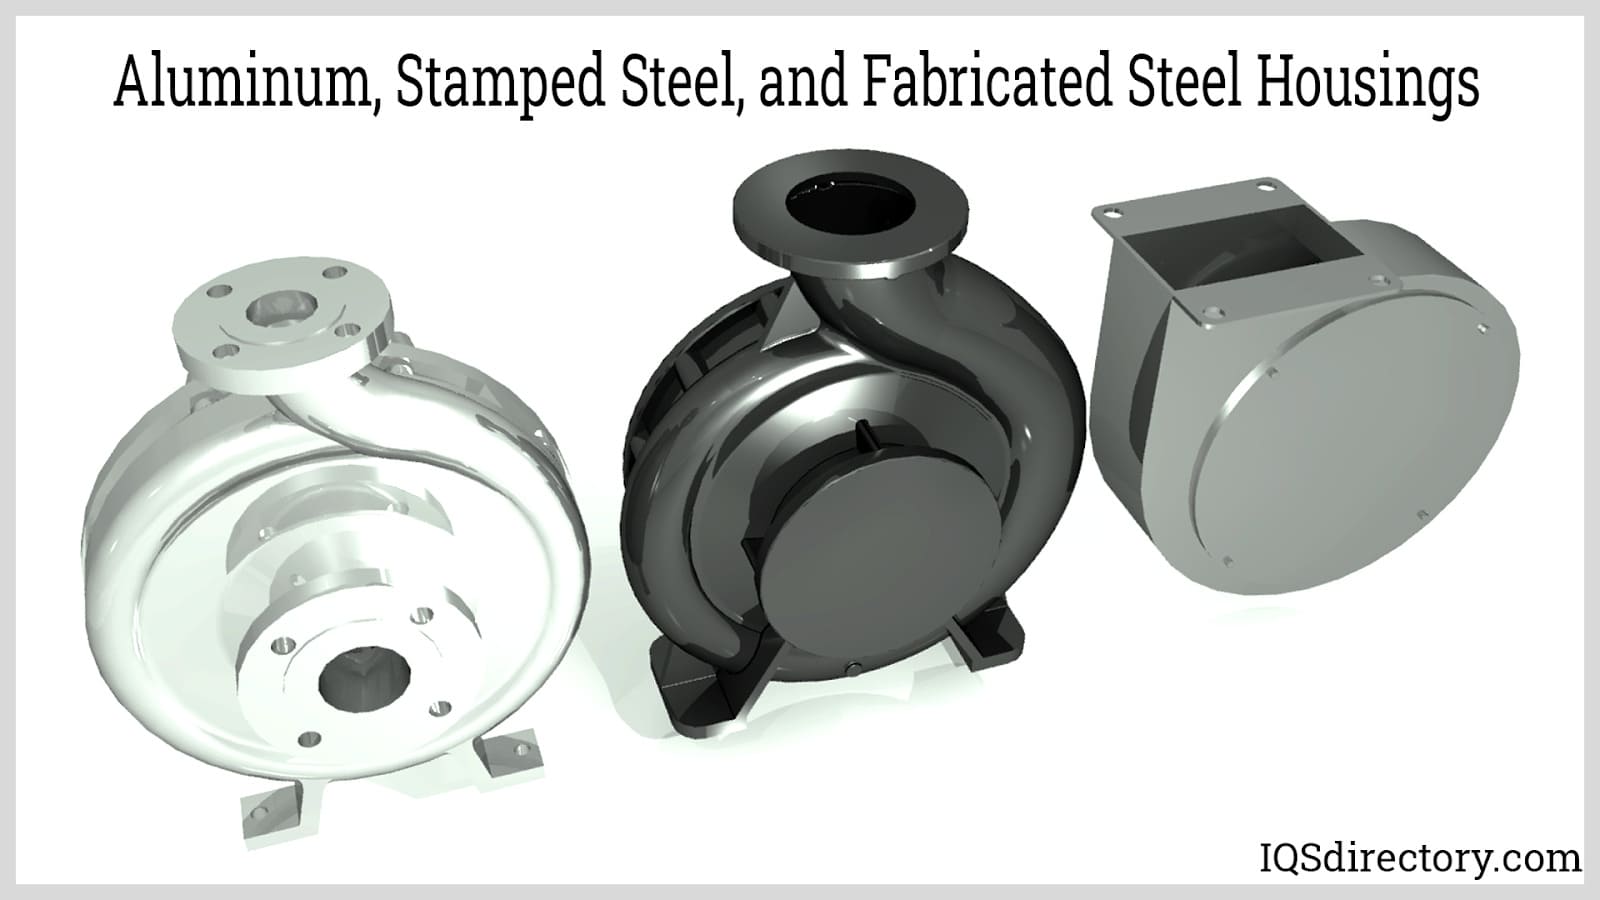 Aluminum, Stamped Steel, and Fabricated Steel Housings